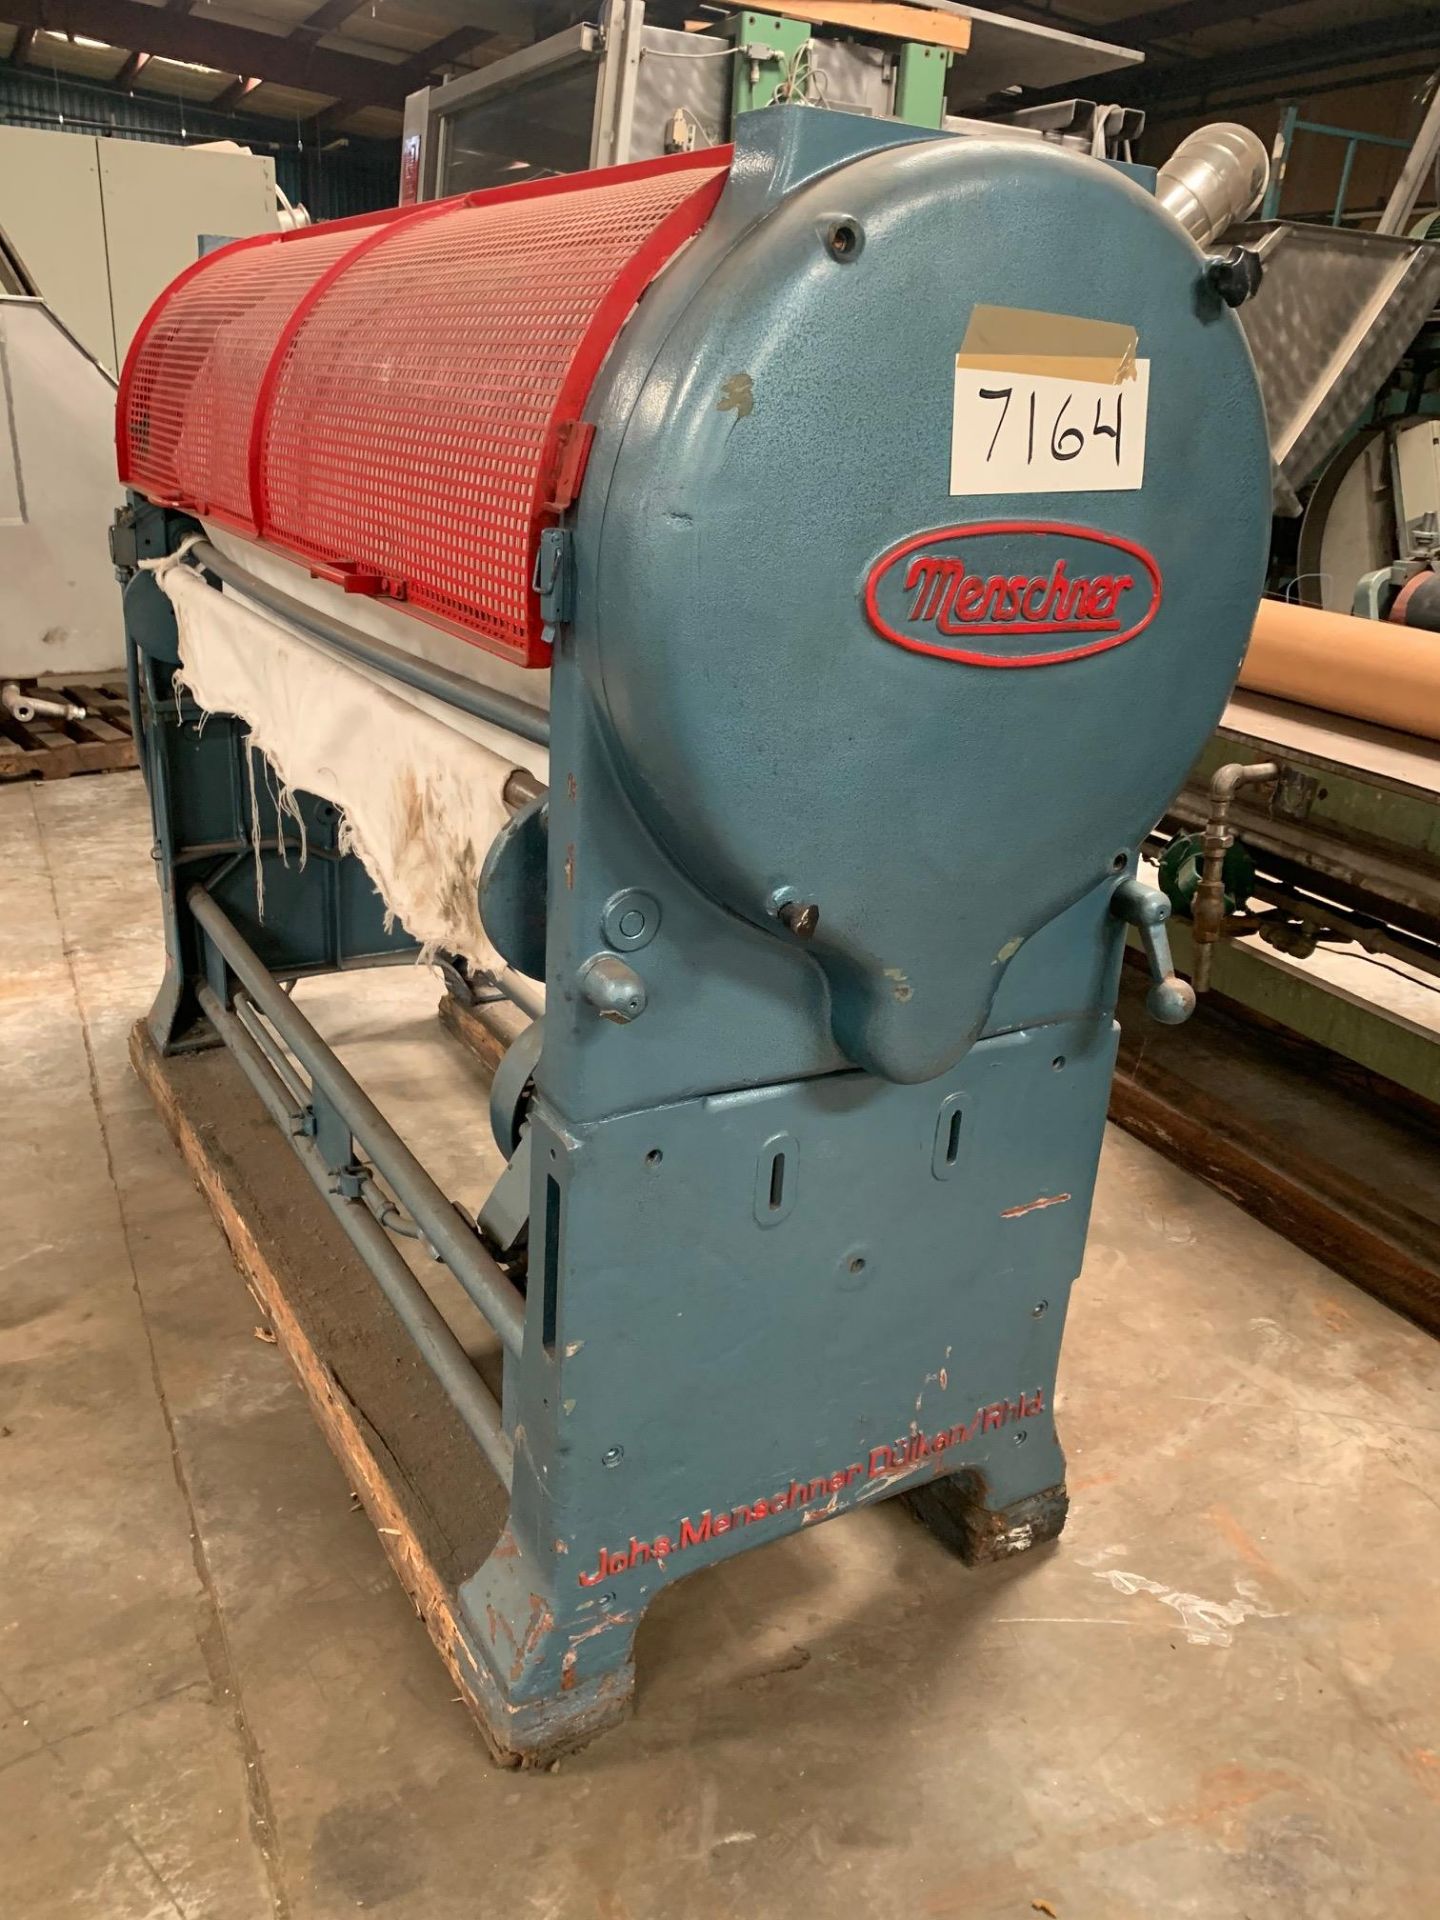 Menschnerr Relaxing Fabric Machine 72” 7.5 Hp 220/460 volts, Rigging Fee: $50 - Image 2 of 9